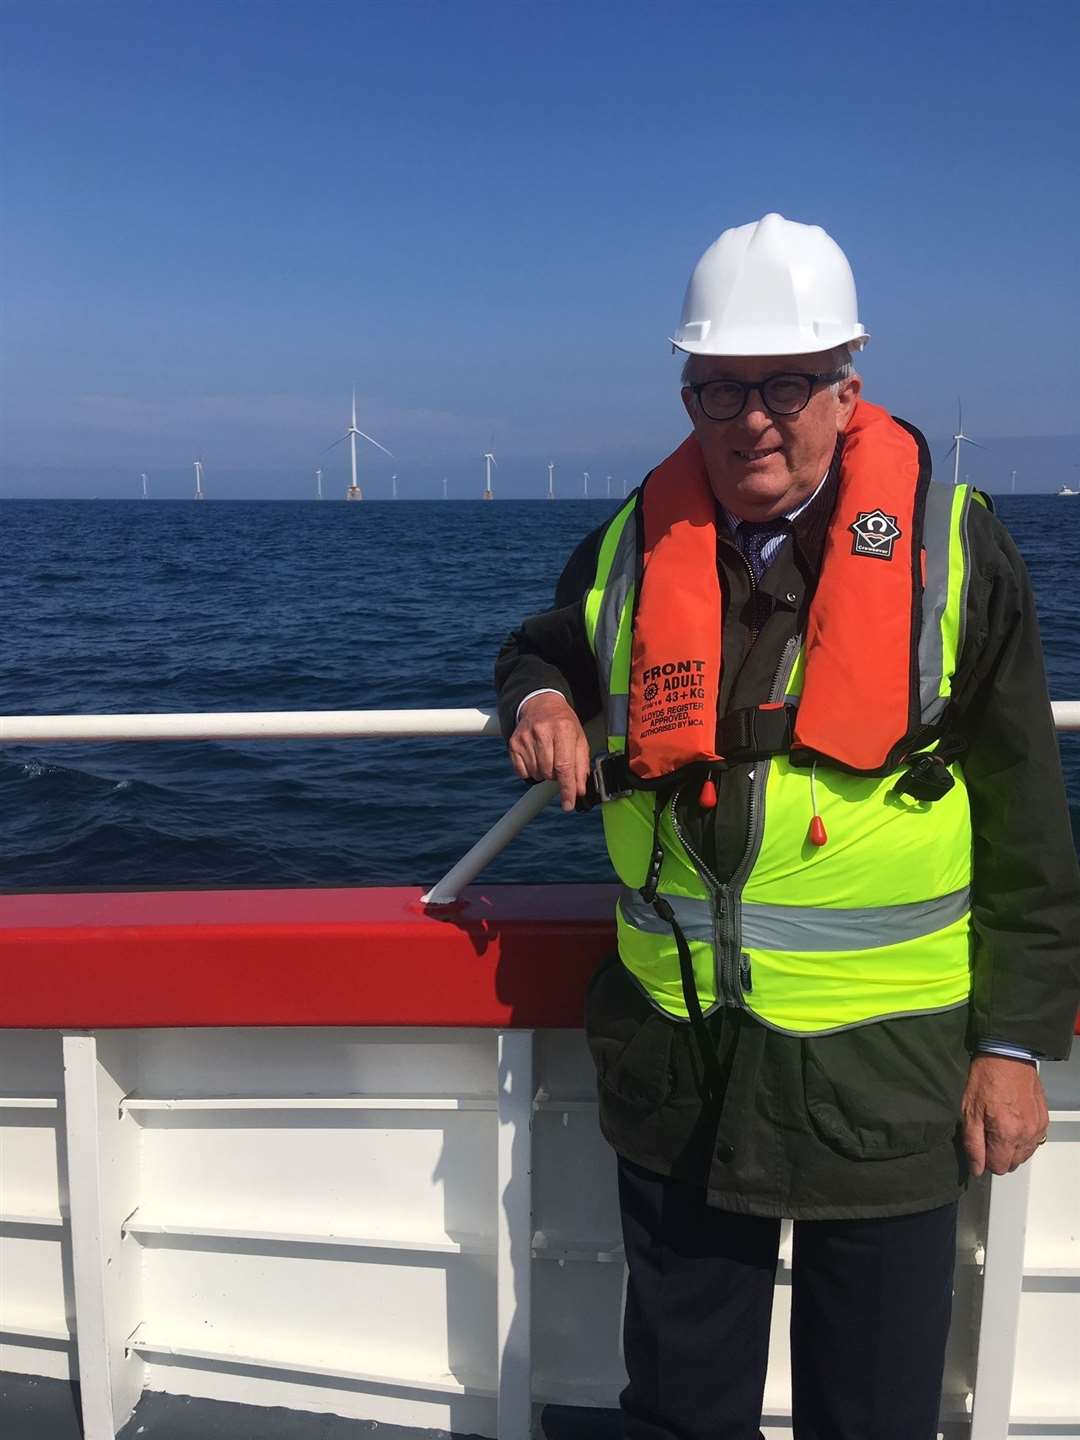 Caithness, Sutherland and Easter Ross MP Jamie Stone attended the official opening and said: "We must continue to invest in clean, green and renewable energy."